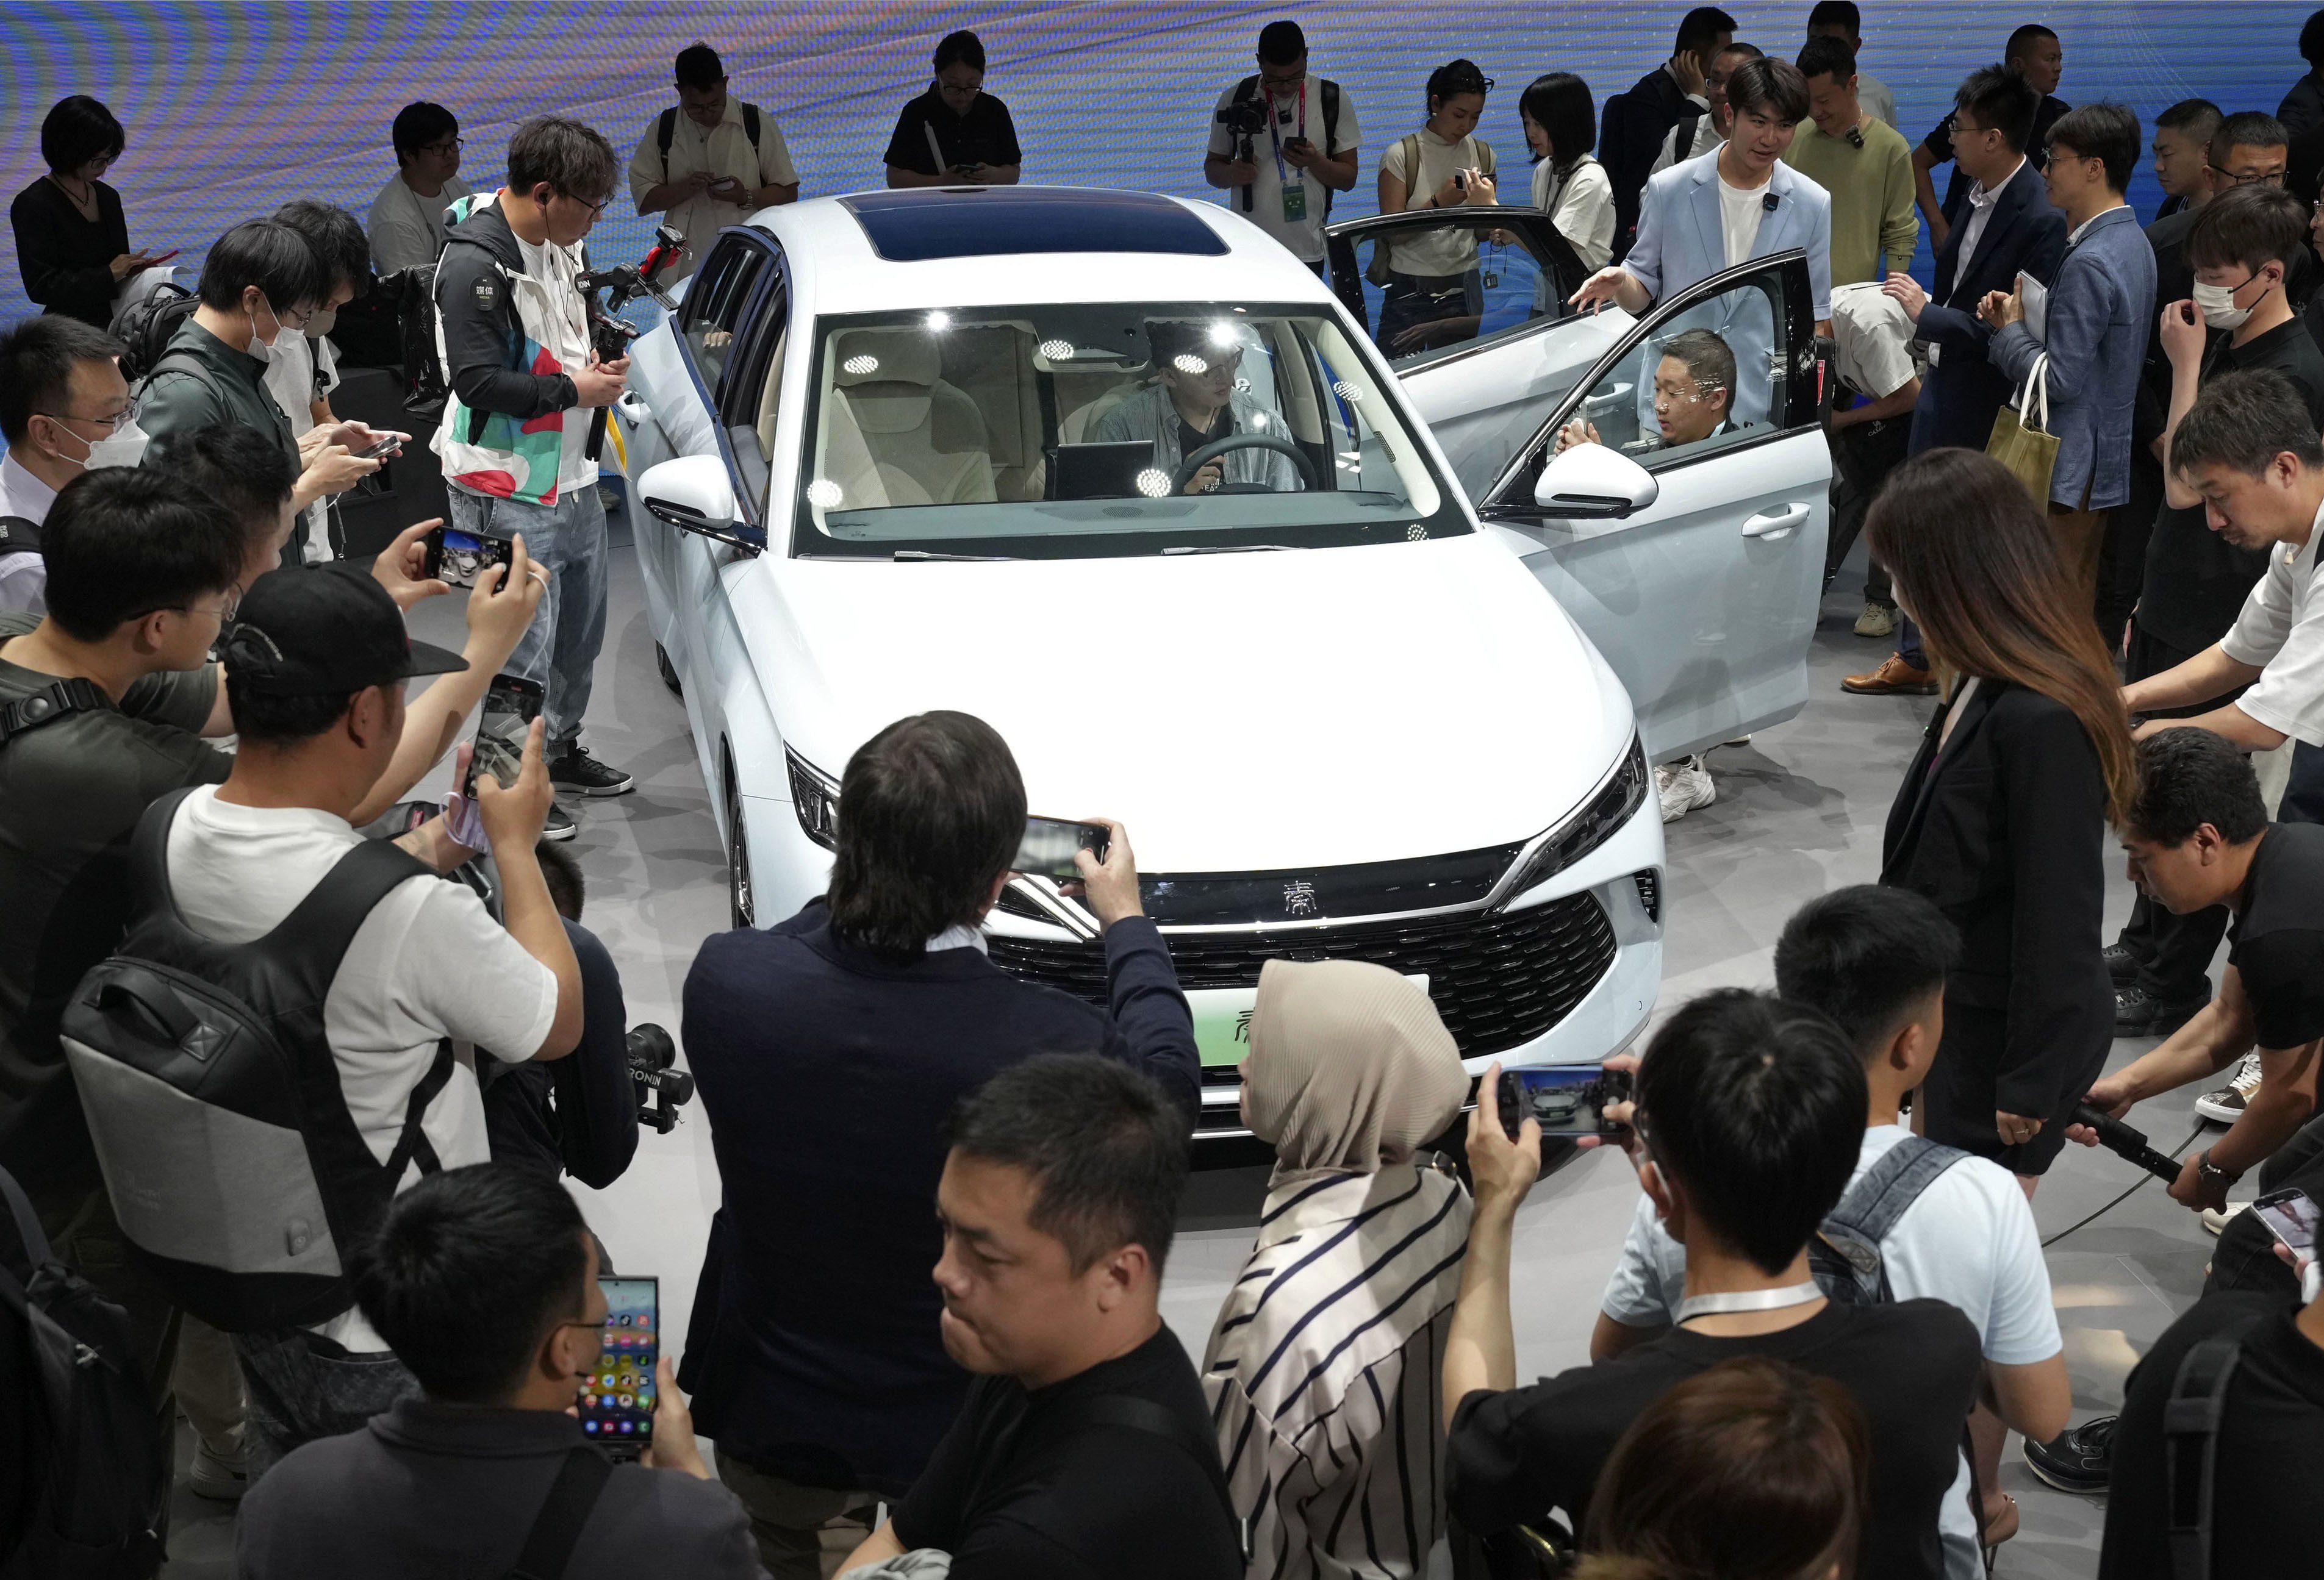 Visitors take a closer look at BYD’s new plug-in hybrid model at the Beijing International Automotive Exhibition on April 25. Photo: Kyodo